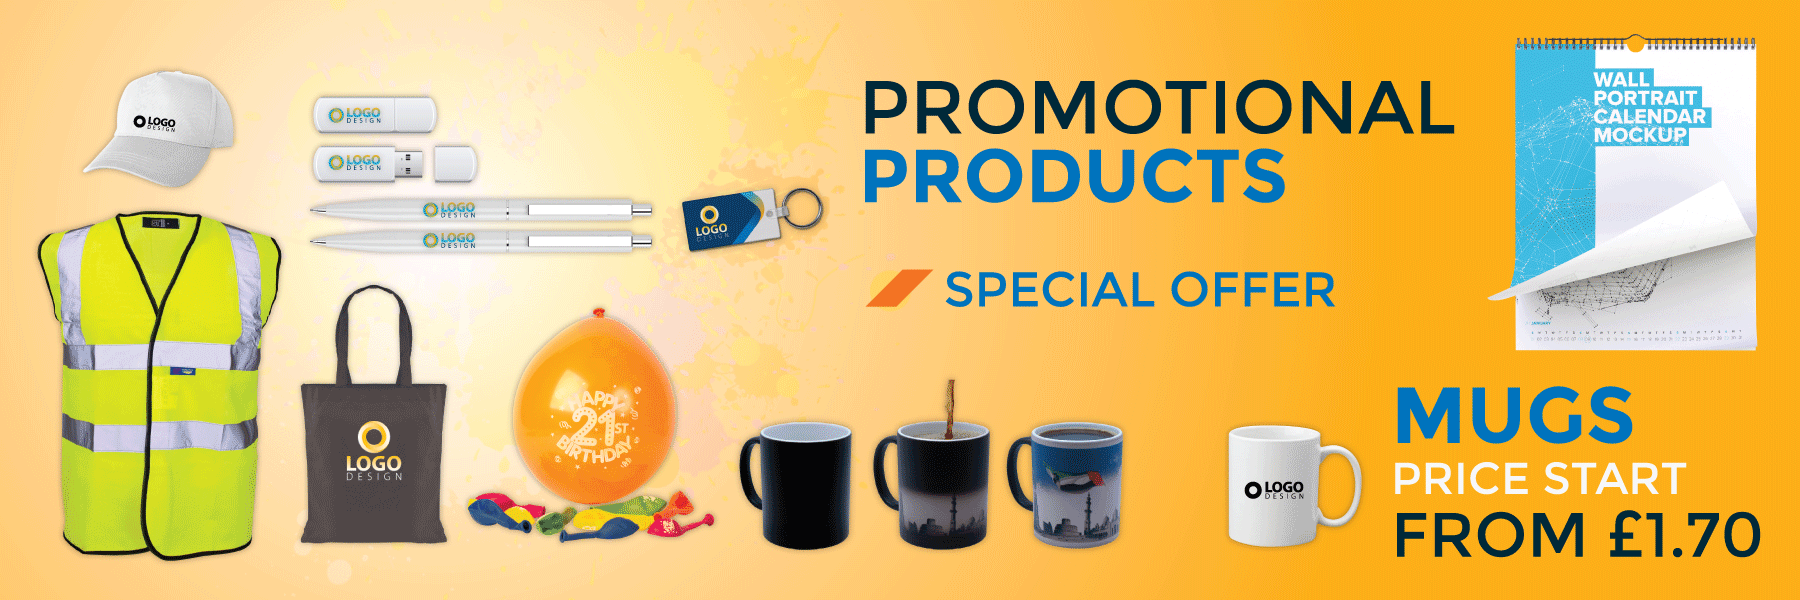 instant print promotional products mugs pens mouse pad keyrings caps and bags printing shop in london